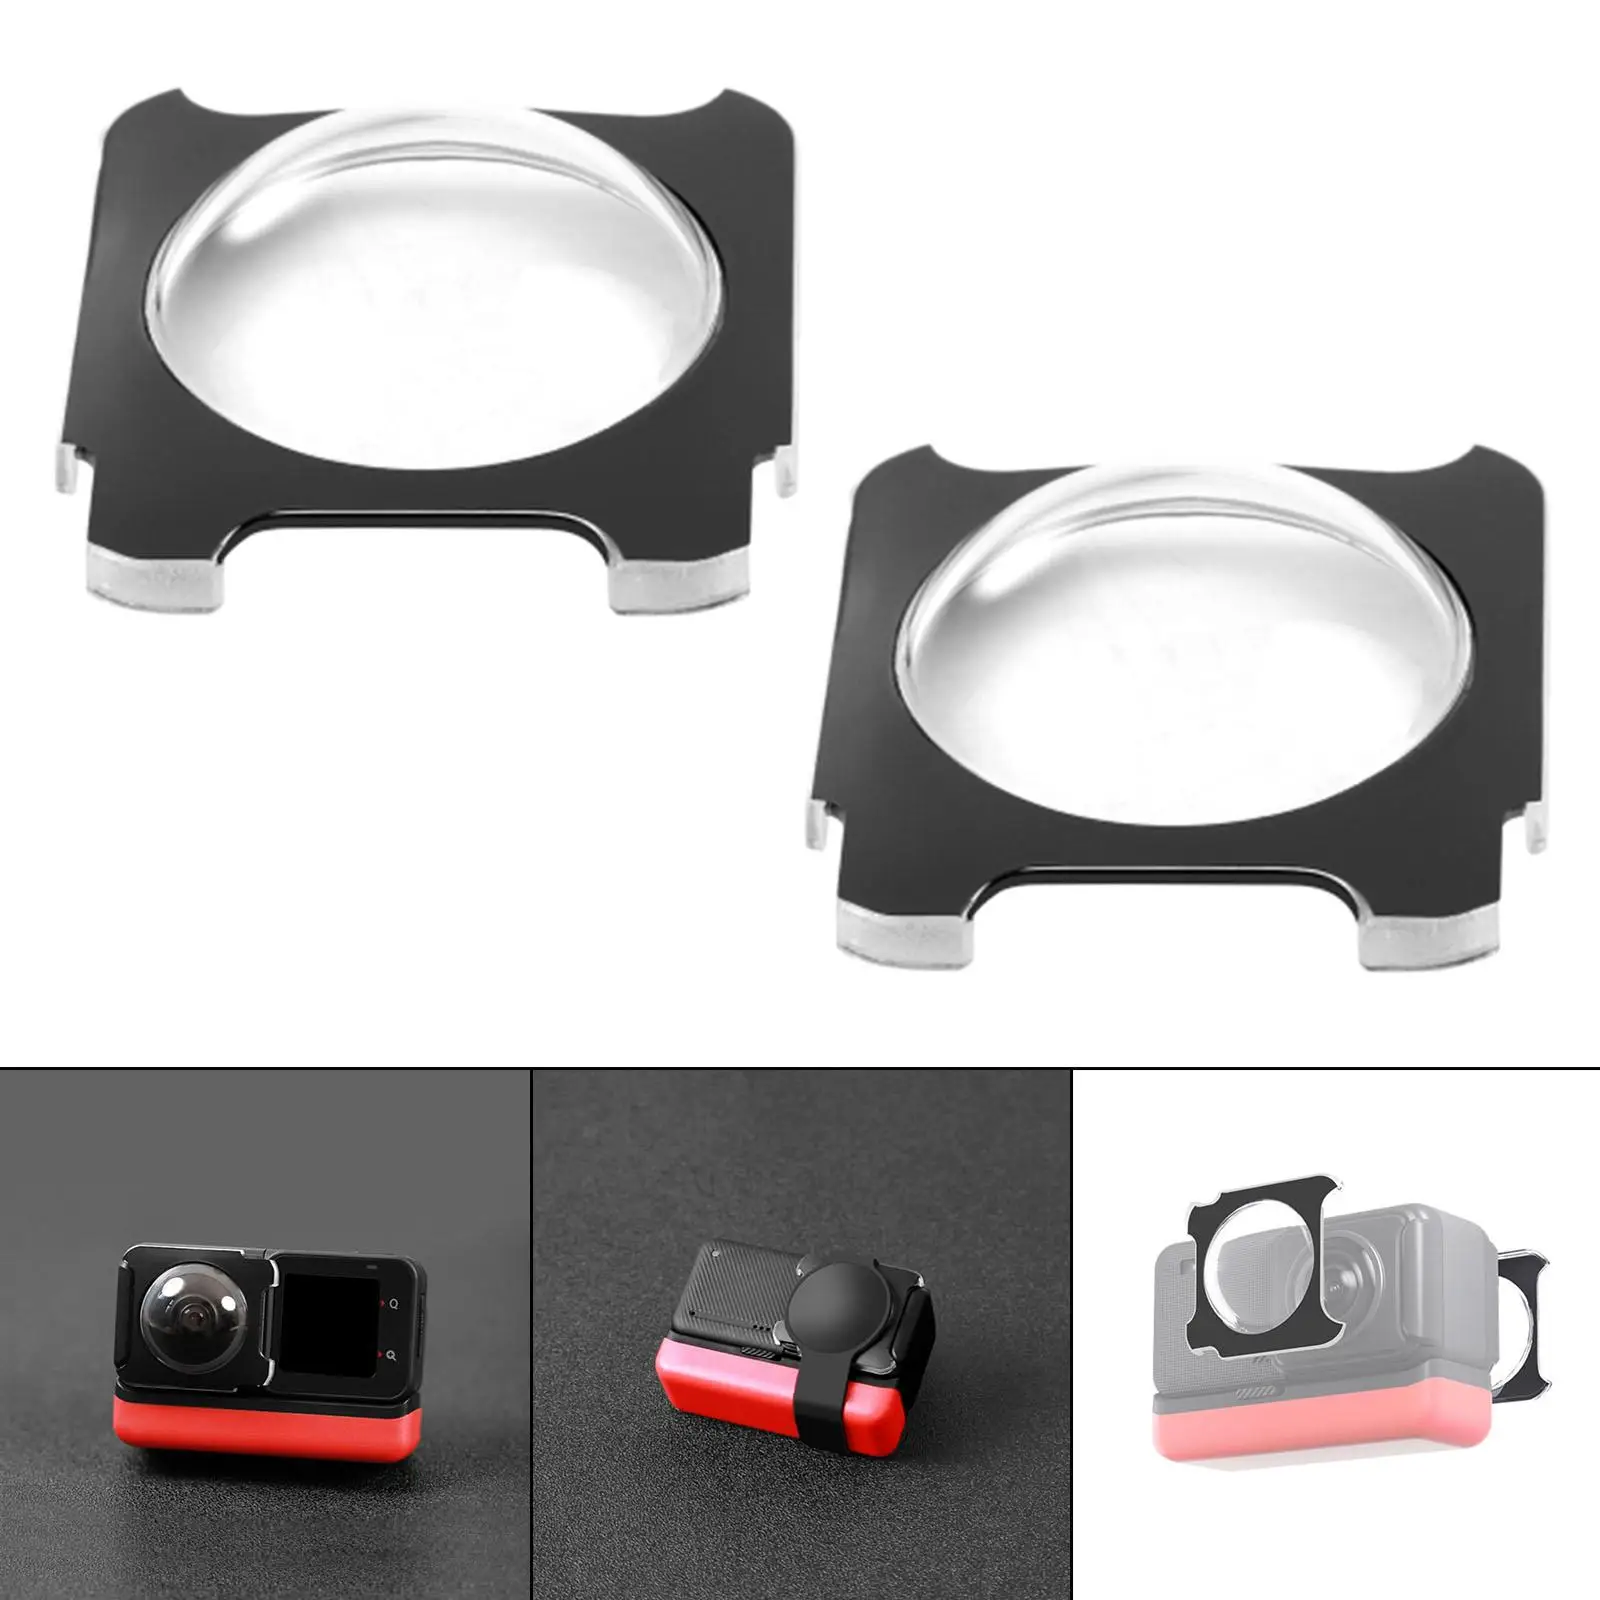 Sticky Lens Guards PC Silicone Oilproof Scratch Resistant Dustproof Protective Cover for Insta360 One R RS Sphere Action Camera